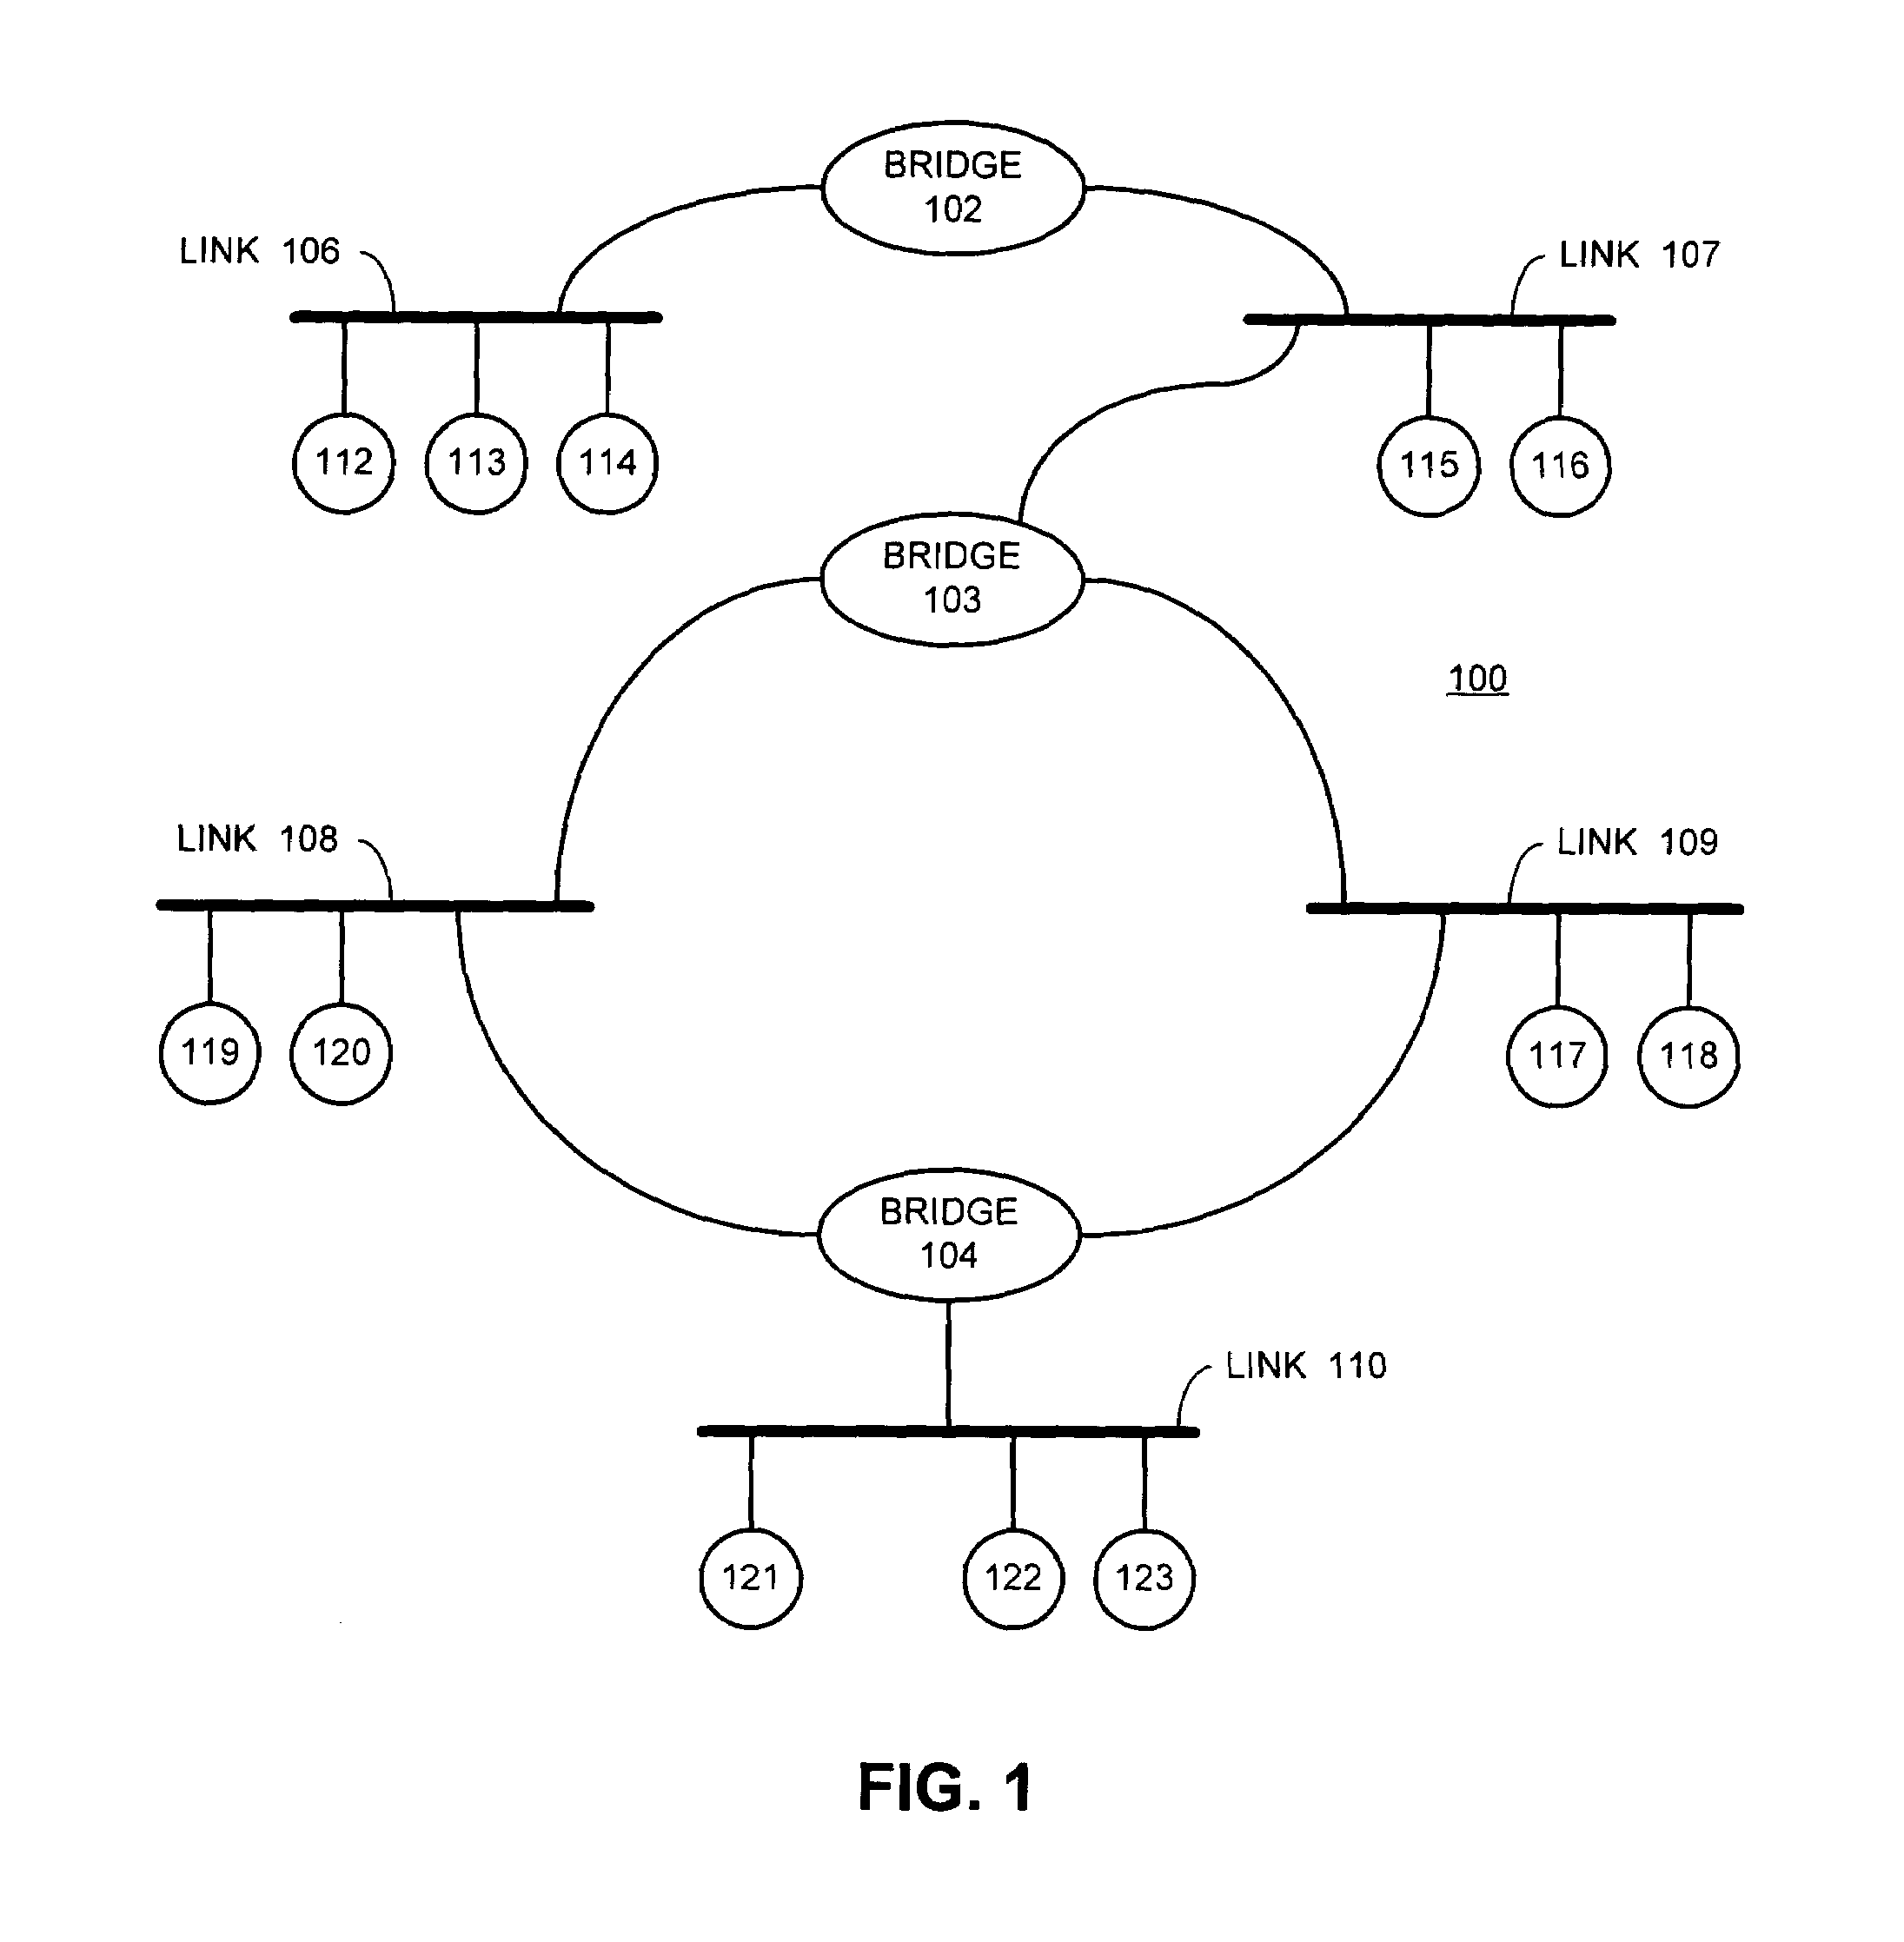 Method and apparatus for preventing spanning tree loops during traffic overload conditions